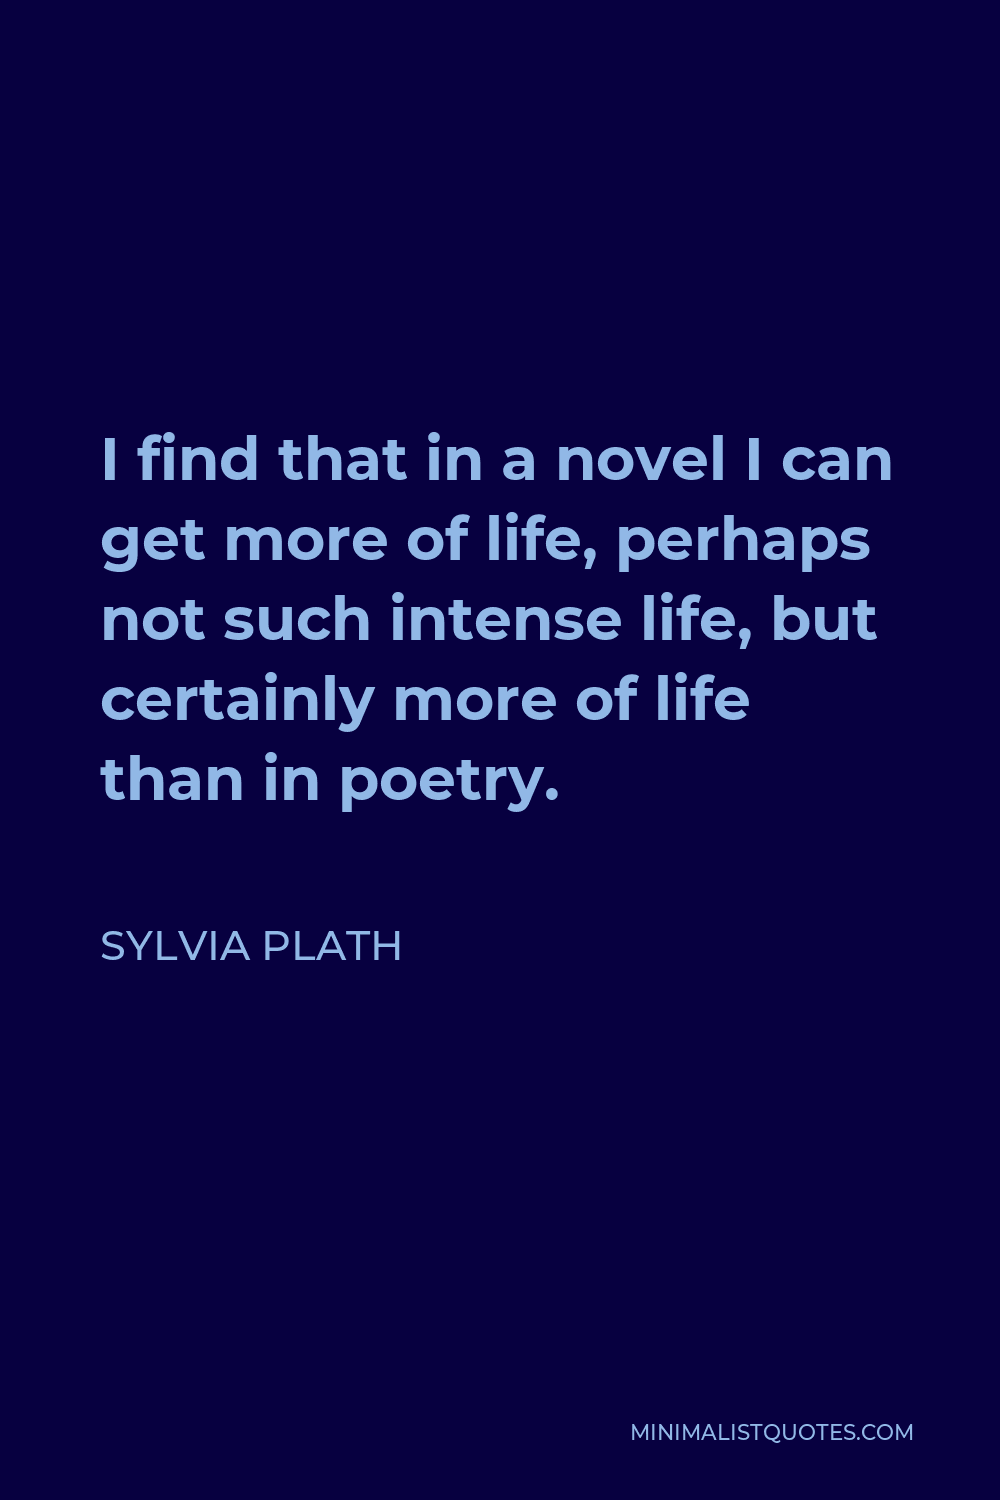 Sylvia Plath Quote - I find that in a novel I can get more of life, perhaps not such intense life, but certainly more of life than in poetry.